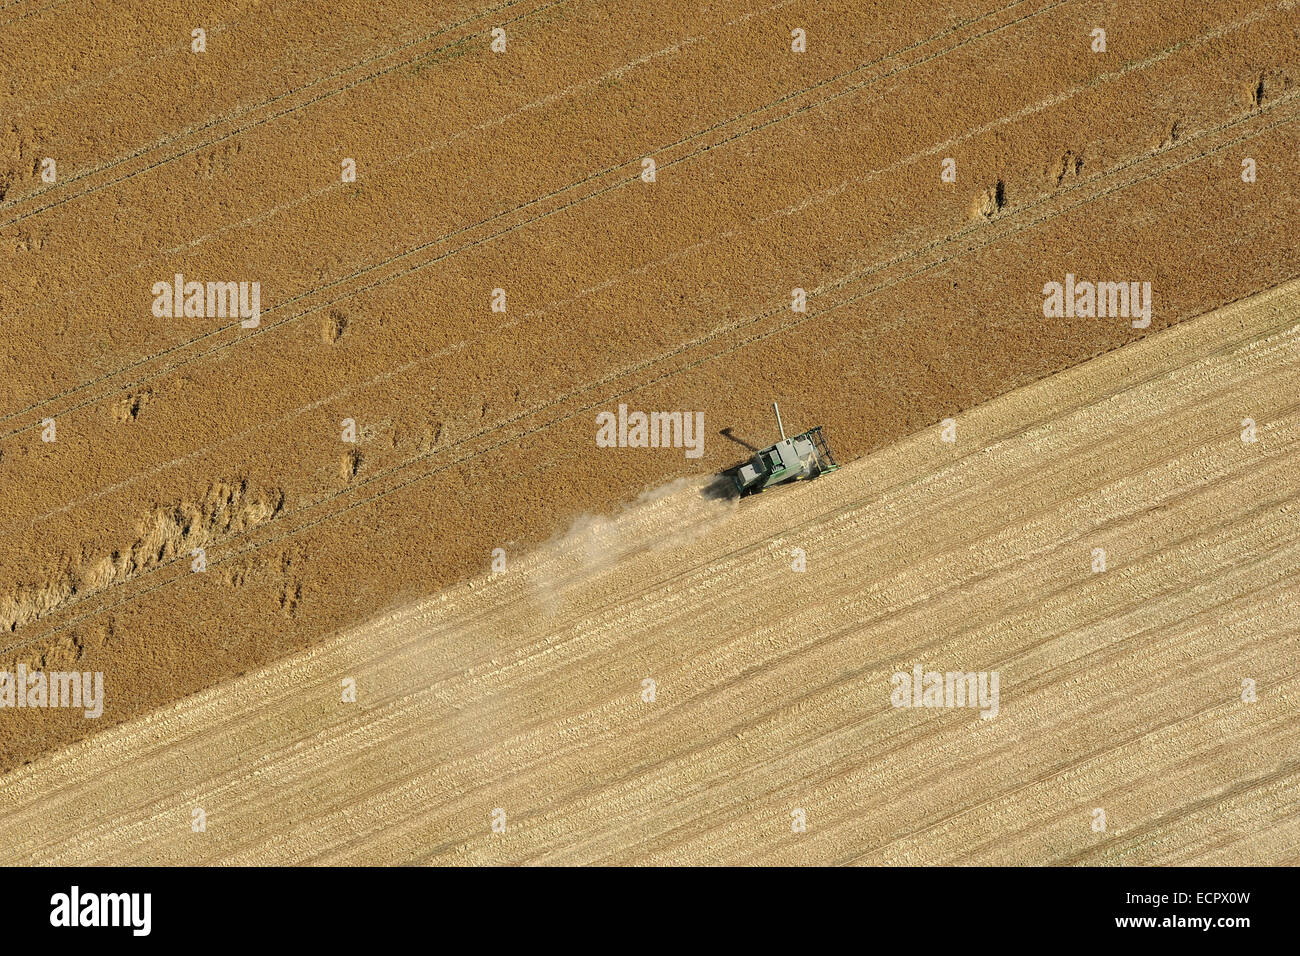 Harvester pick the mature grain from a brown field, 22 July 2013 Stock Photo